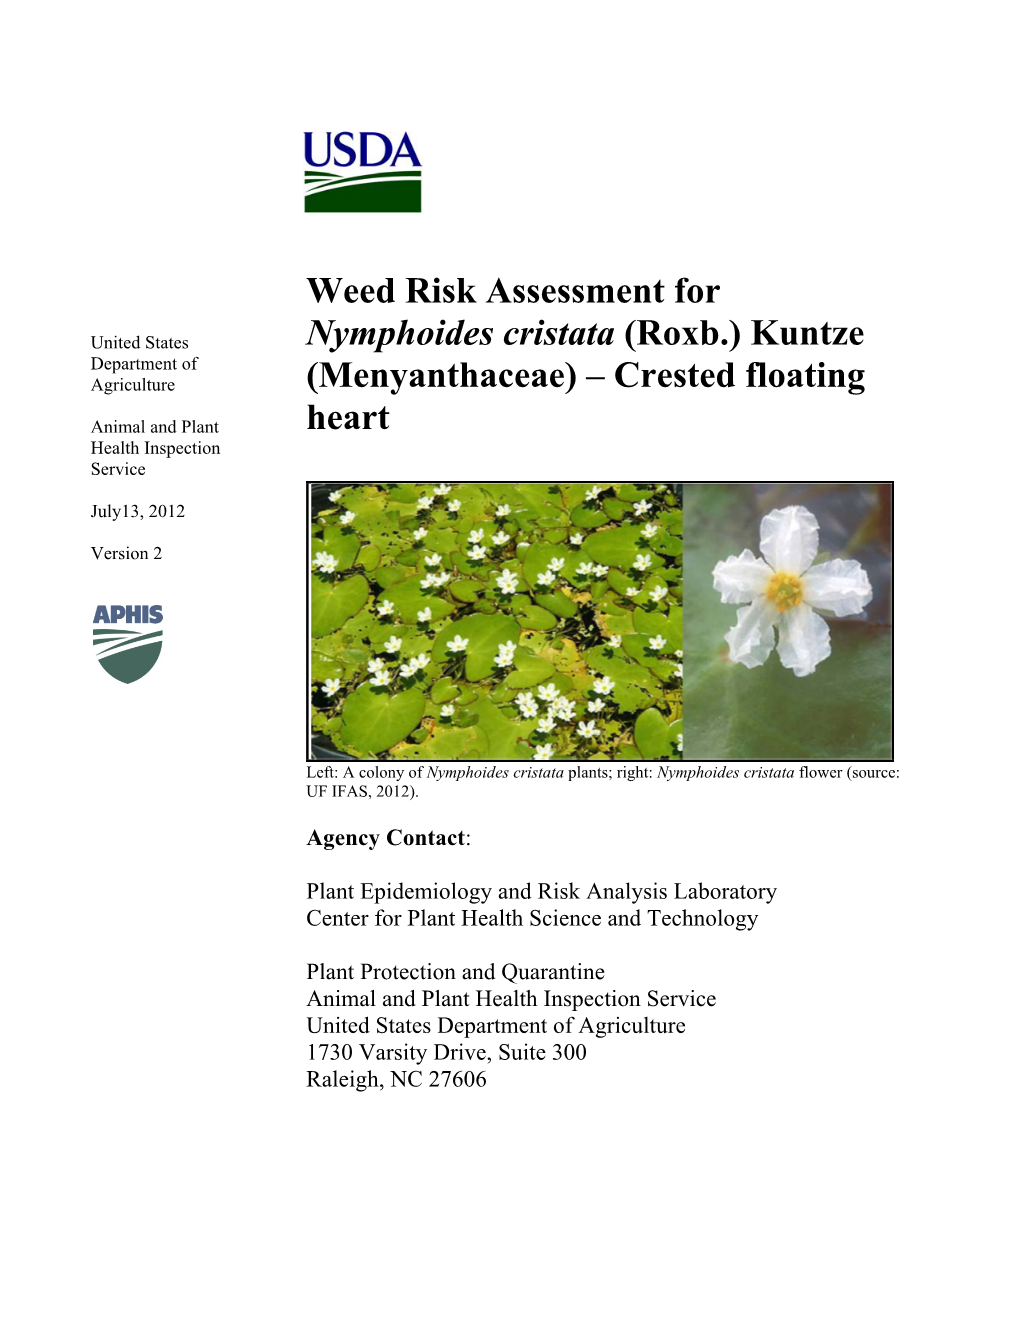 Weed Risk Assessment for Nymphoides Cristata (Roxb.) Kuntze (Menyanthaceae)